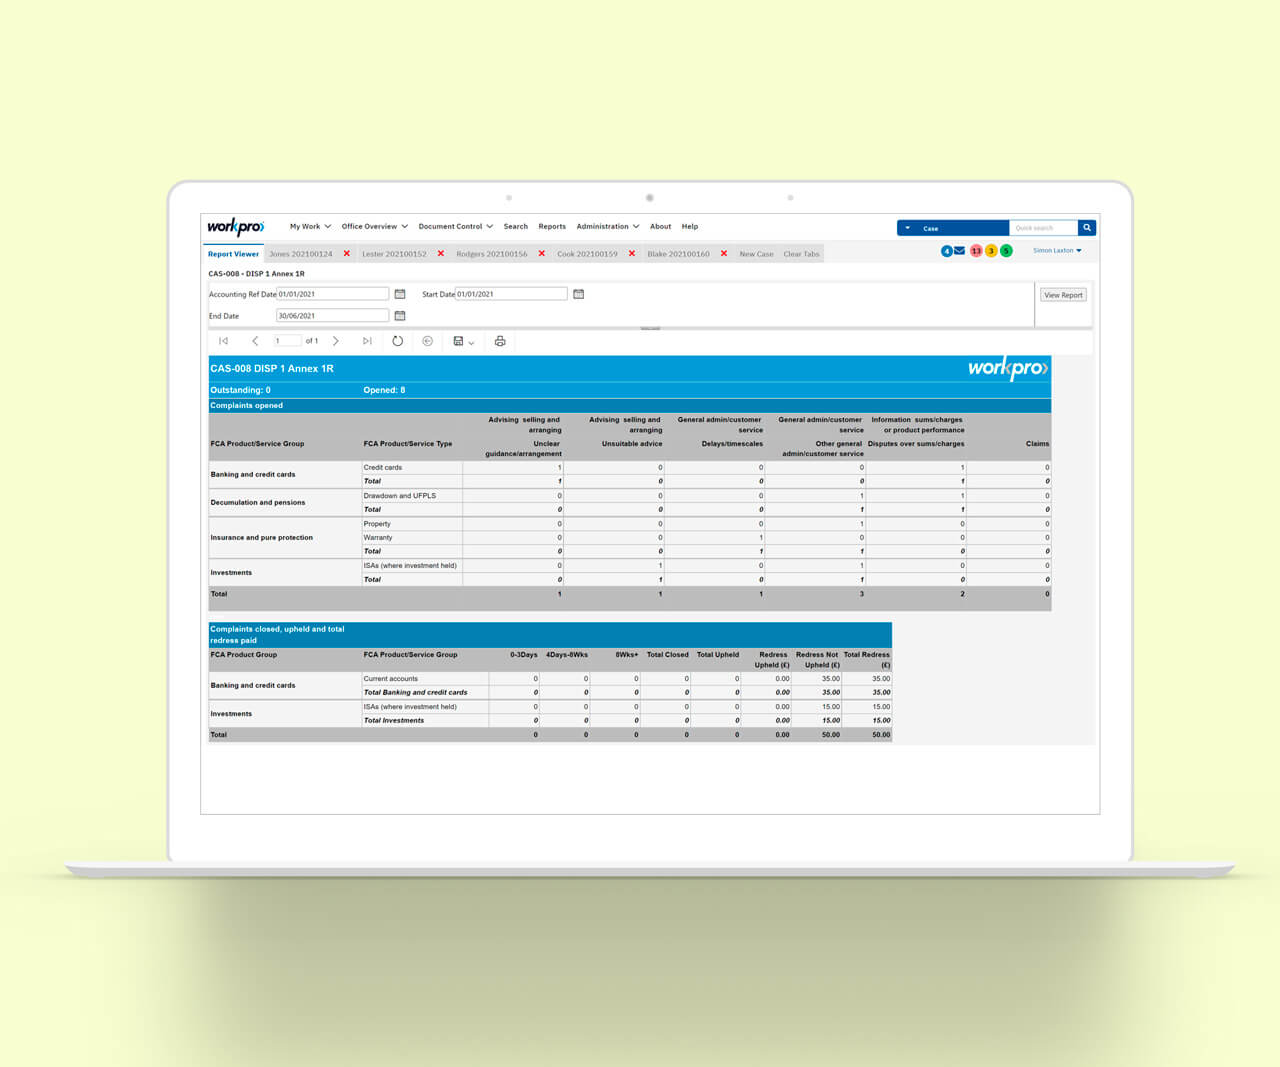 A report example for the financial services workpro solution